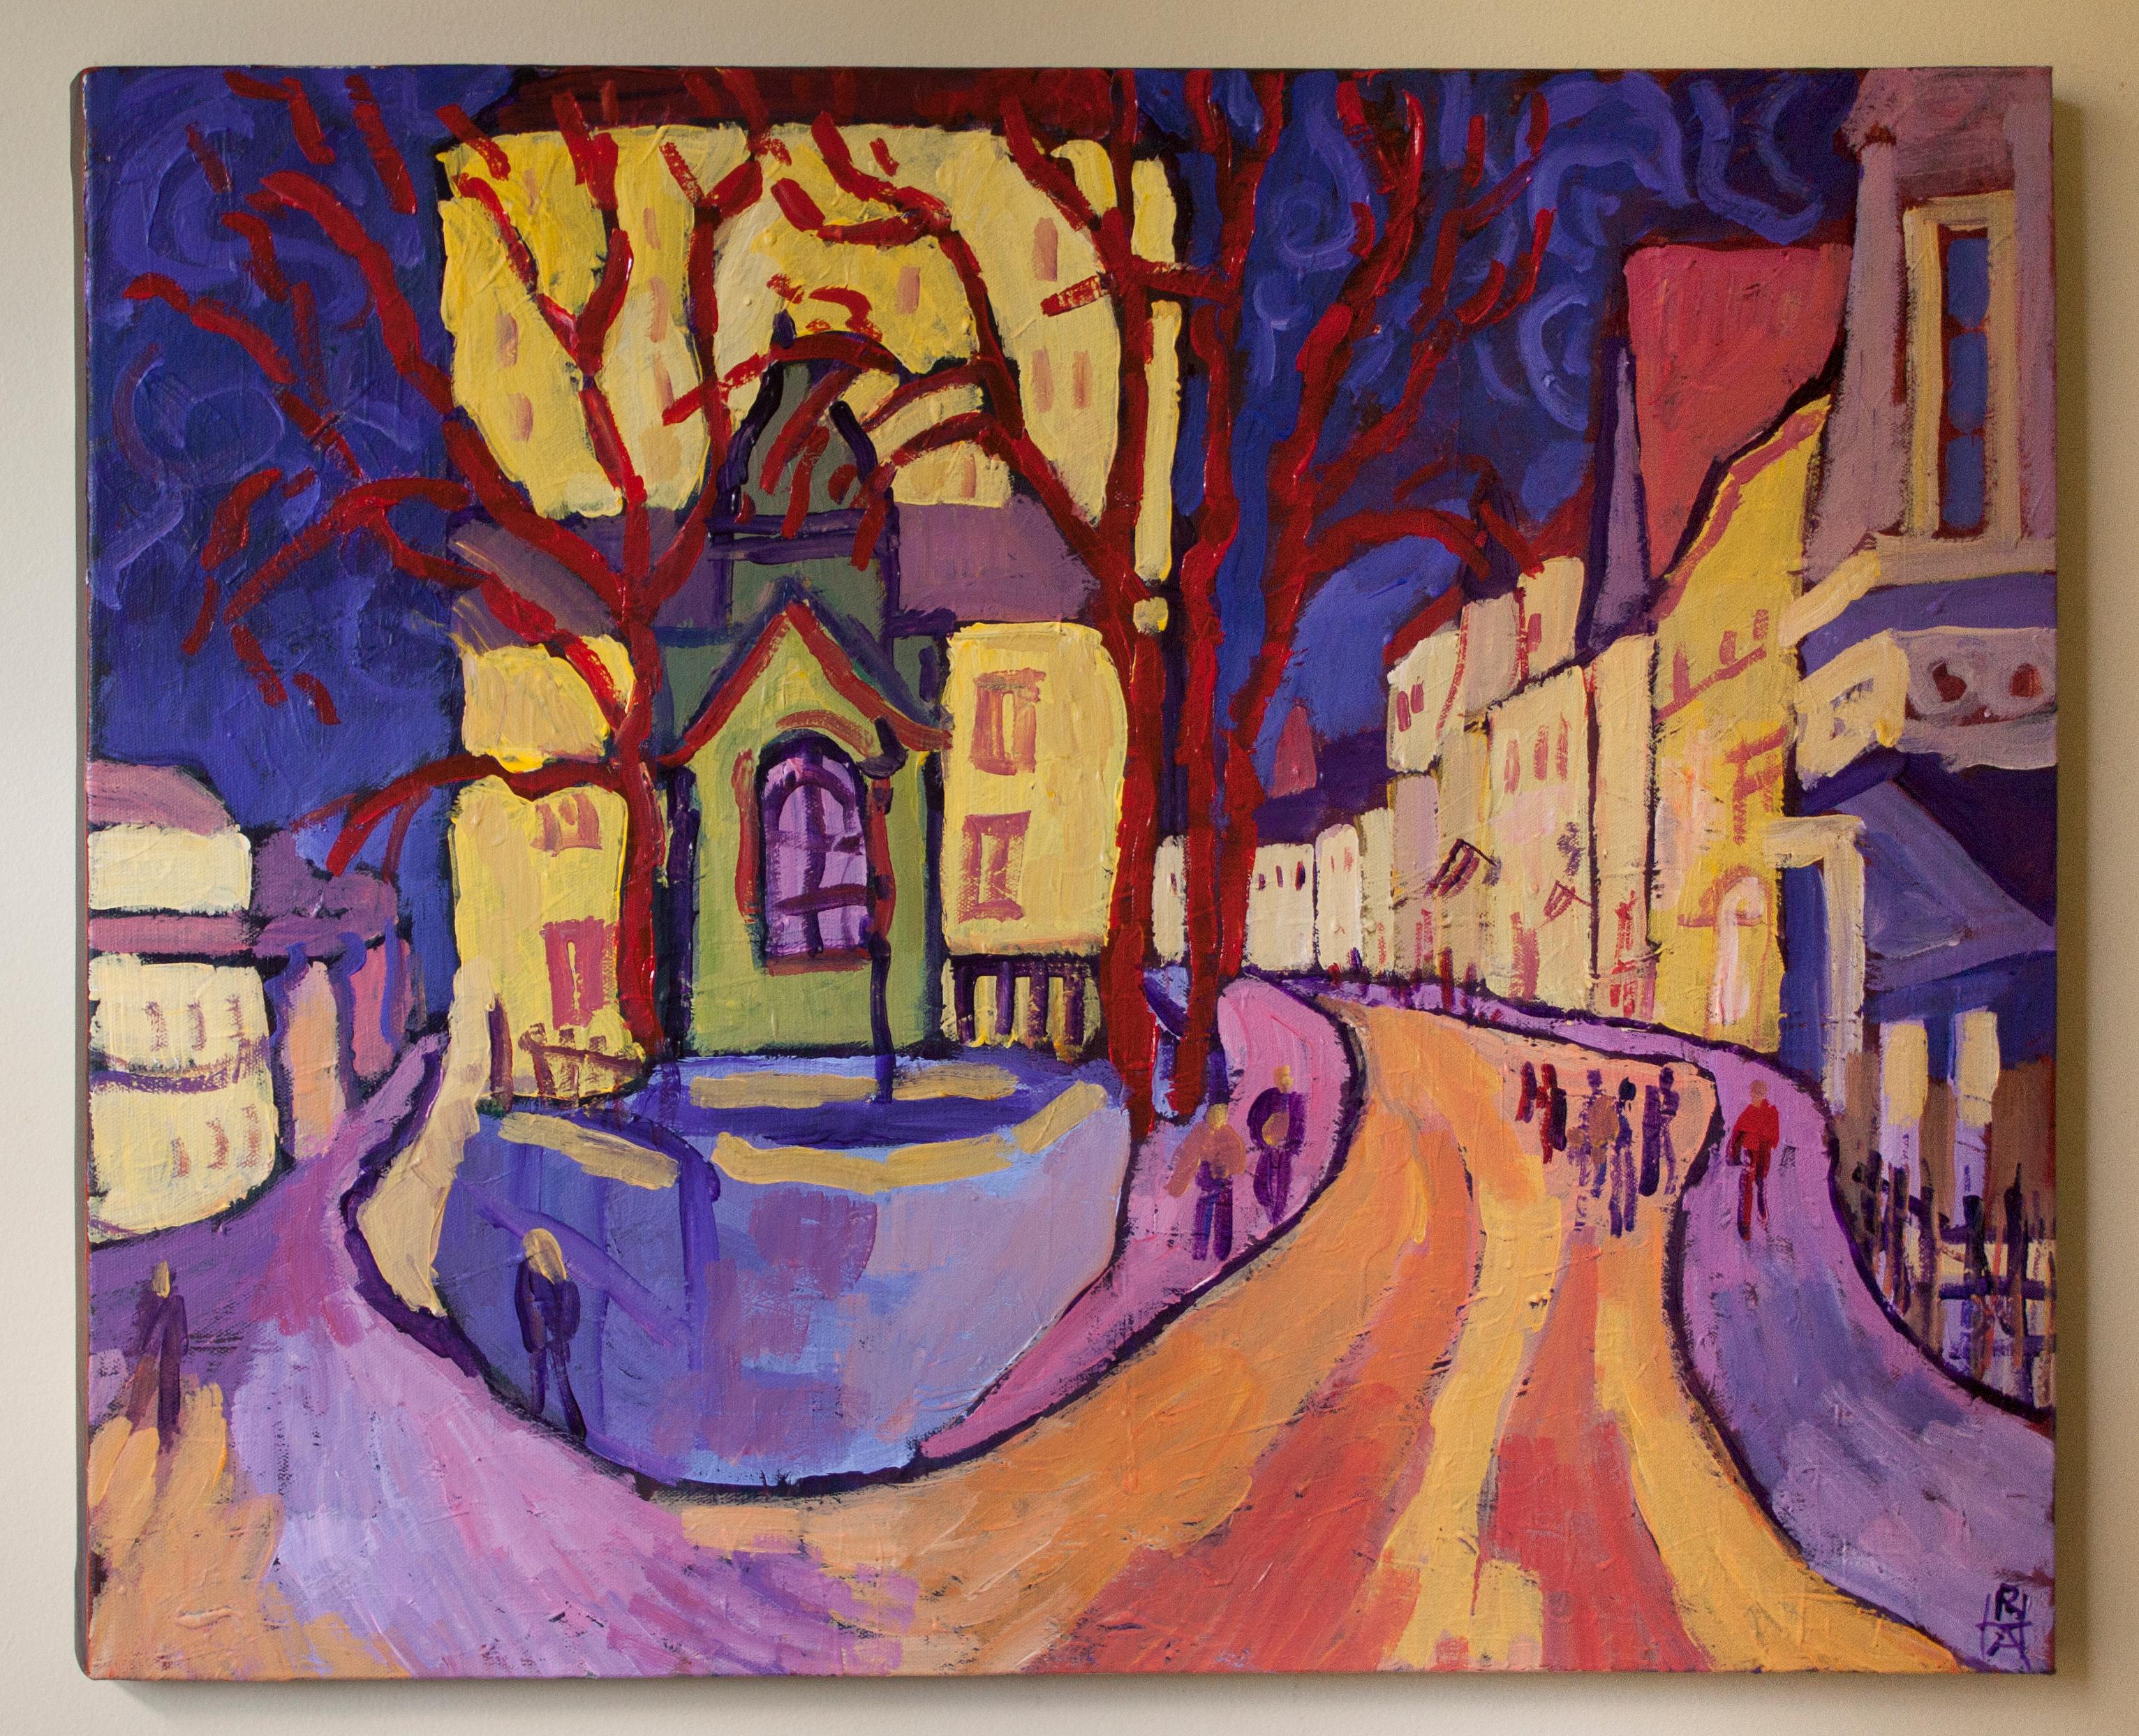 <p>Artist Comments<br />This Fauve-inspired work makes use of two dominant sets of contrasting colors: yellow/violet and blue/orange. This projects and amplifies the colors within the composition. I kept the brushwork loose, and only included detail